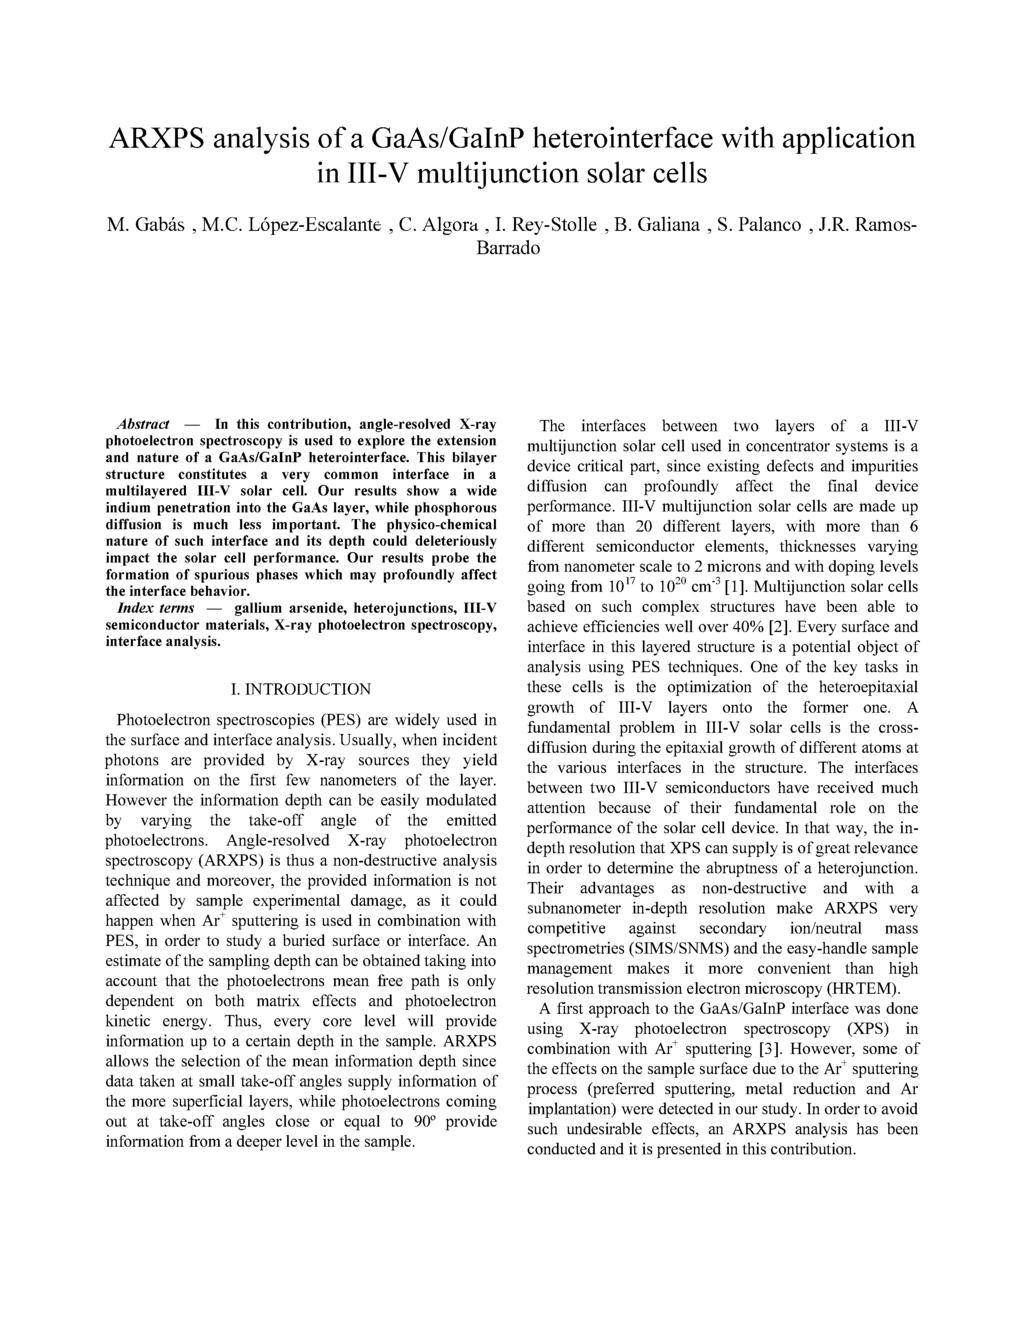 ARPS analysis of a GaAs/GalnP heterointerface with application in III-V multijunction solar cells M. Gabás, M.C. López-Escalante, C. Algora, I. Rey-Stolle, B. Galiana, S. Palanco, J.R. Ramos- Barrado Abstract In this contribution, angle-resolved -ray photoelectron spectroscopy is used to explore the extension and nature of a GaAs/GalnP heterointerface.